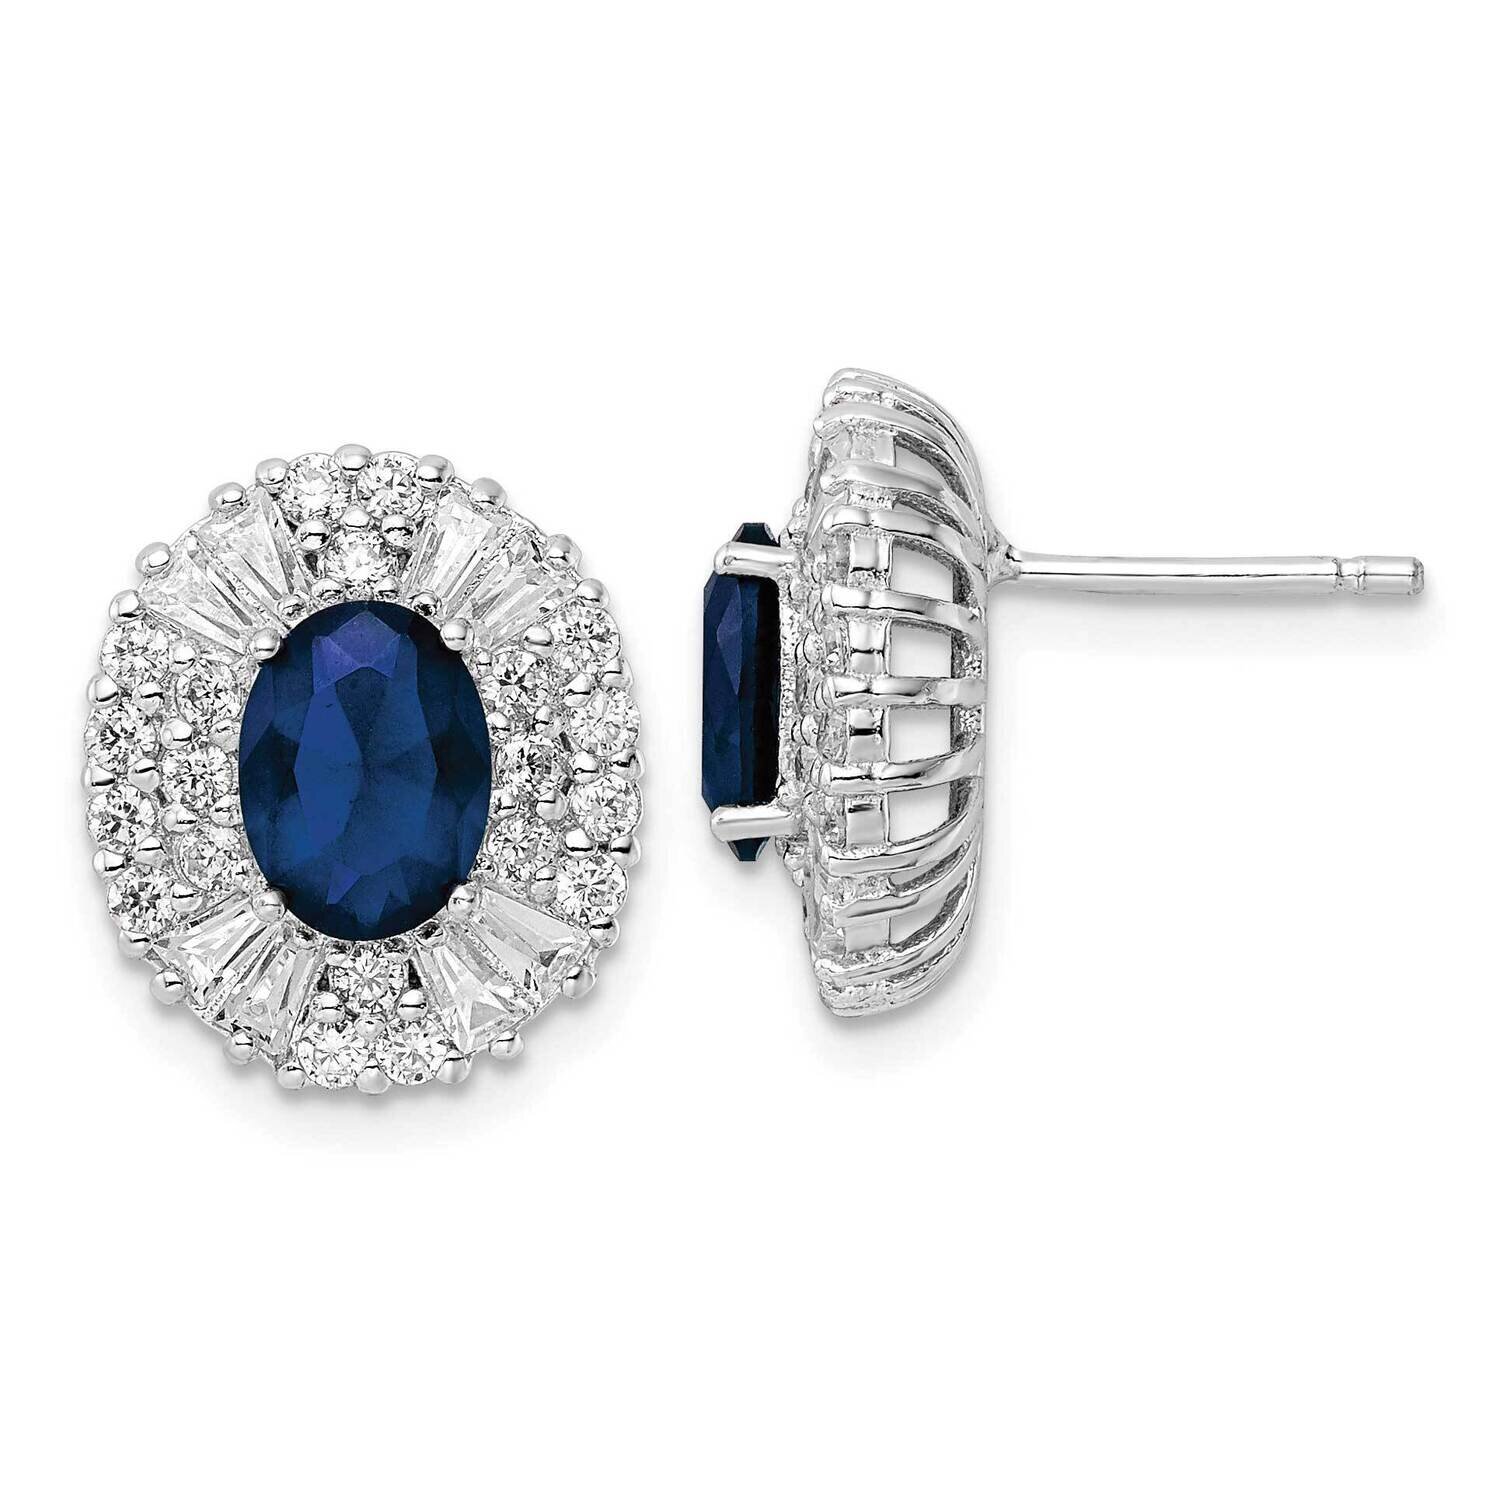 Cheryl M Synthetic Blue Spinel CZ Diamond Oval Post Earrings Sterling Silver Rhodium-plated QCM1489